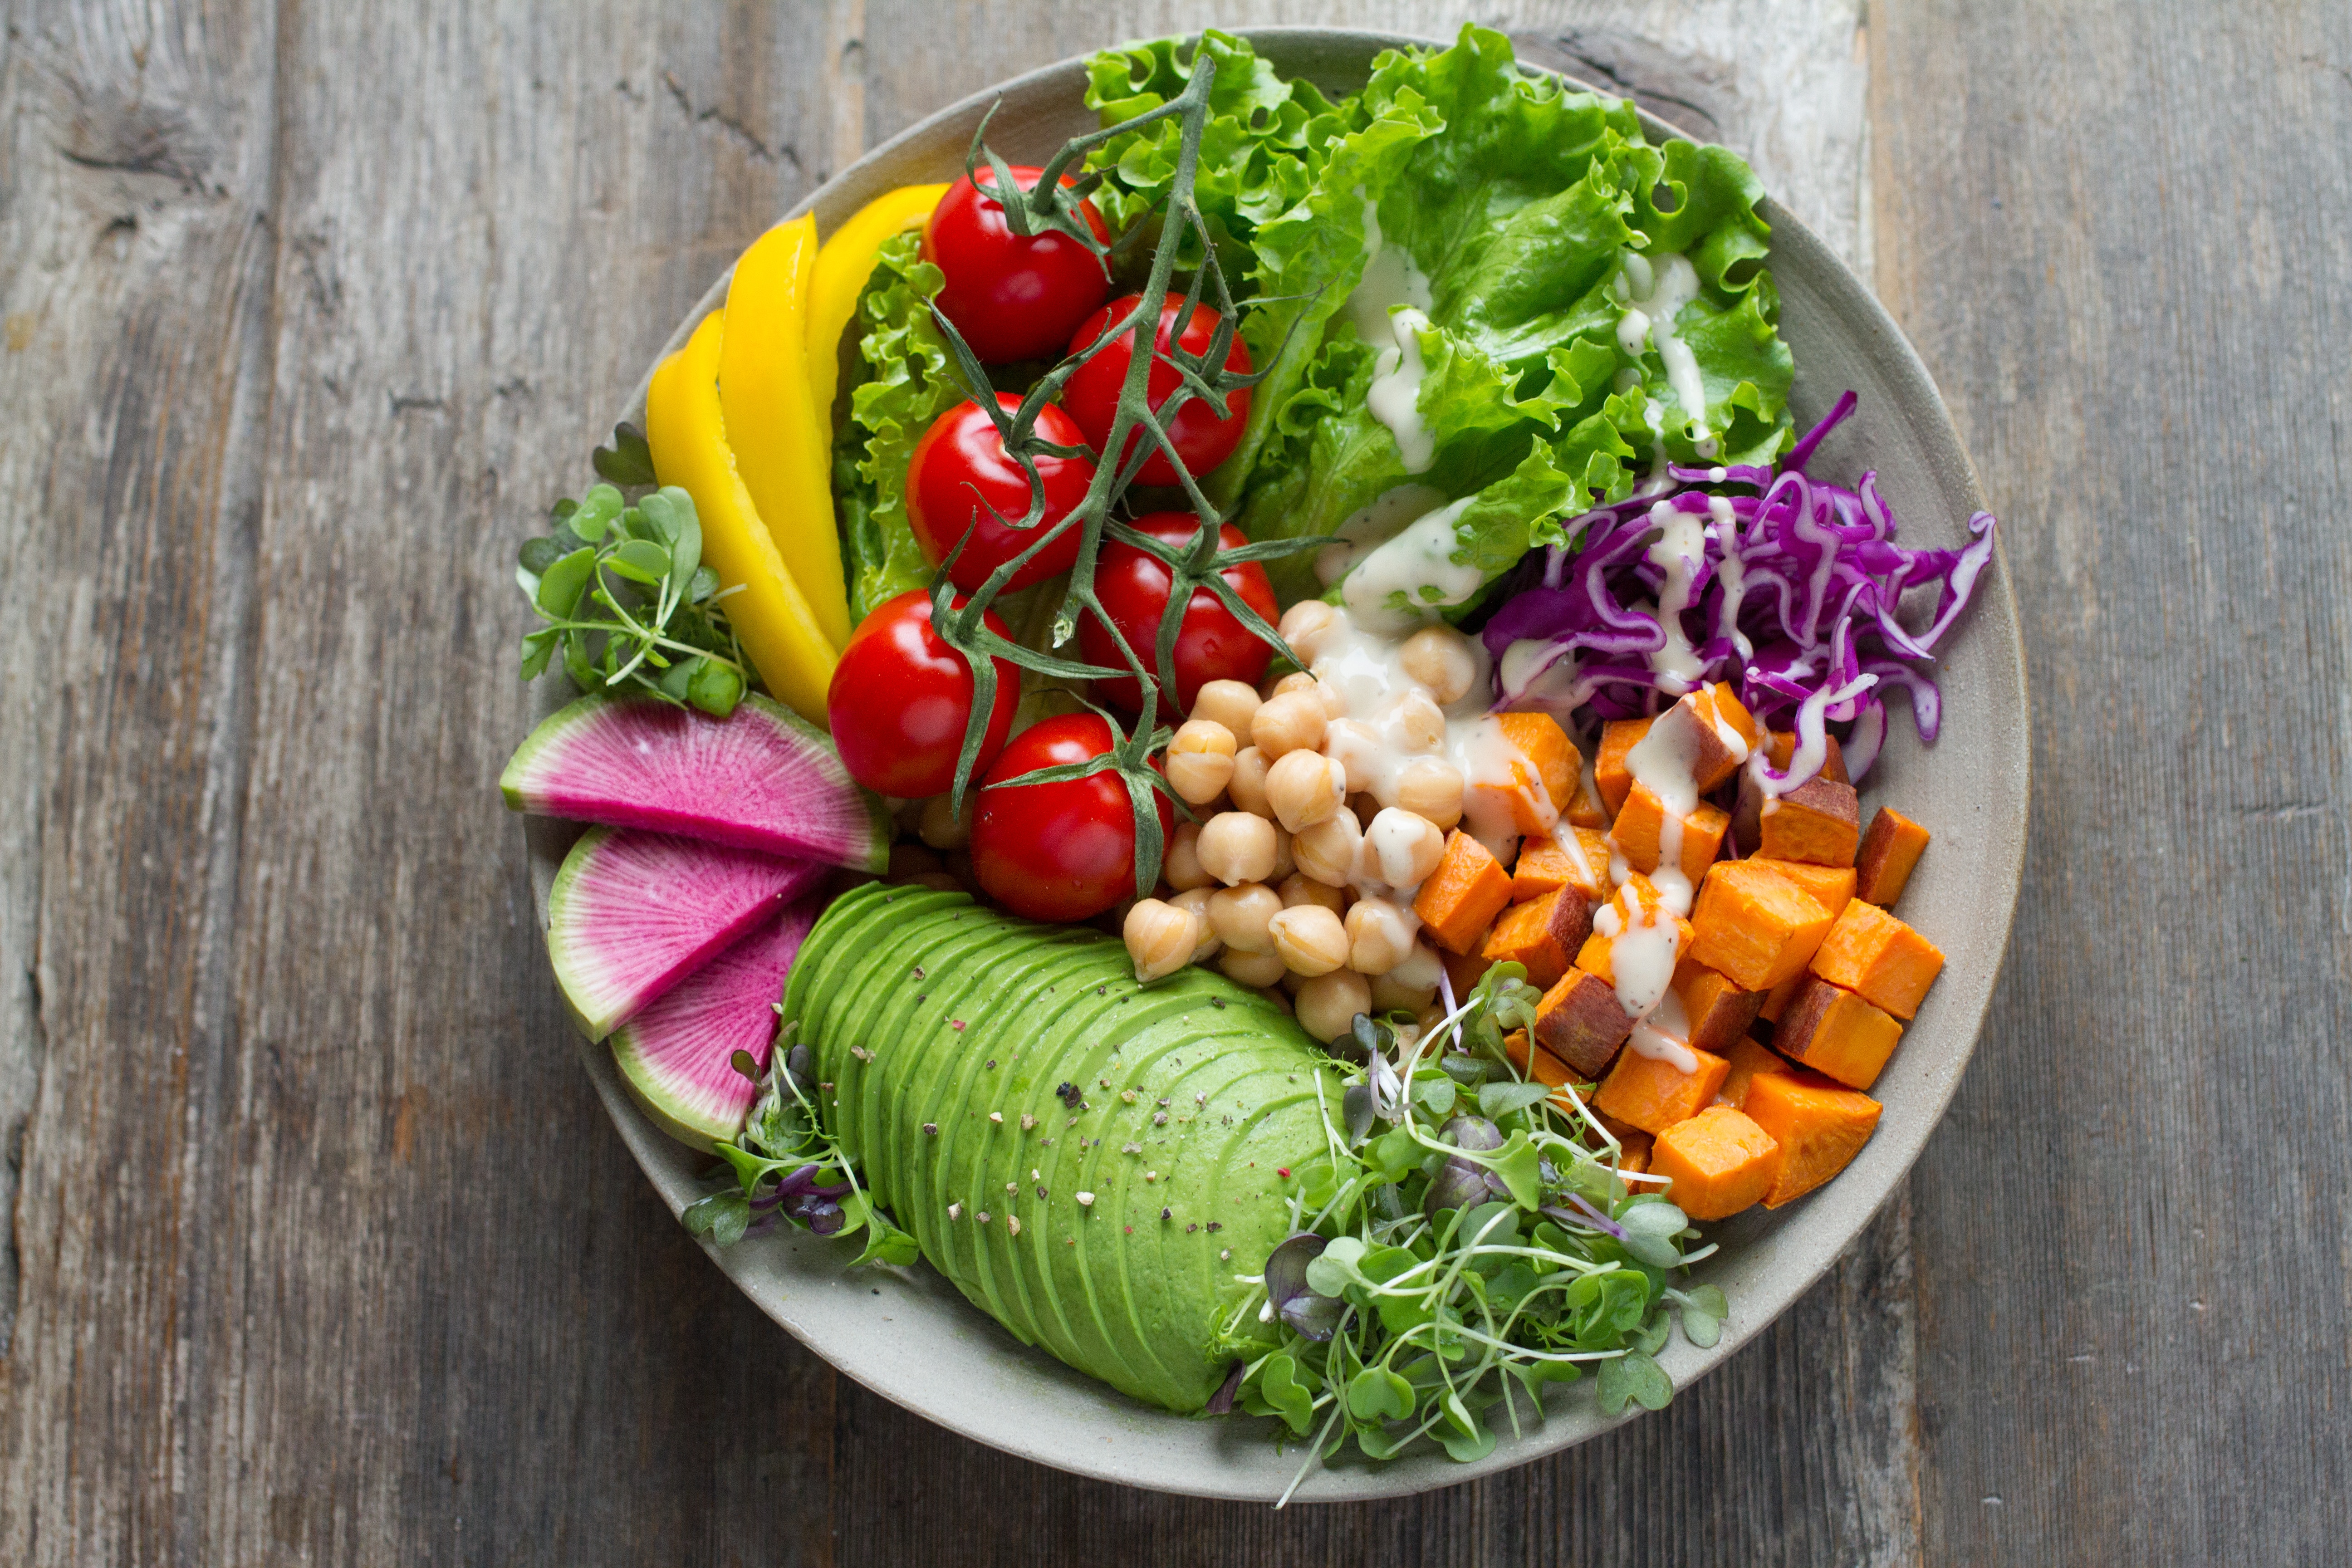 Vitamin and Nutrient bowl of fruits and veggies